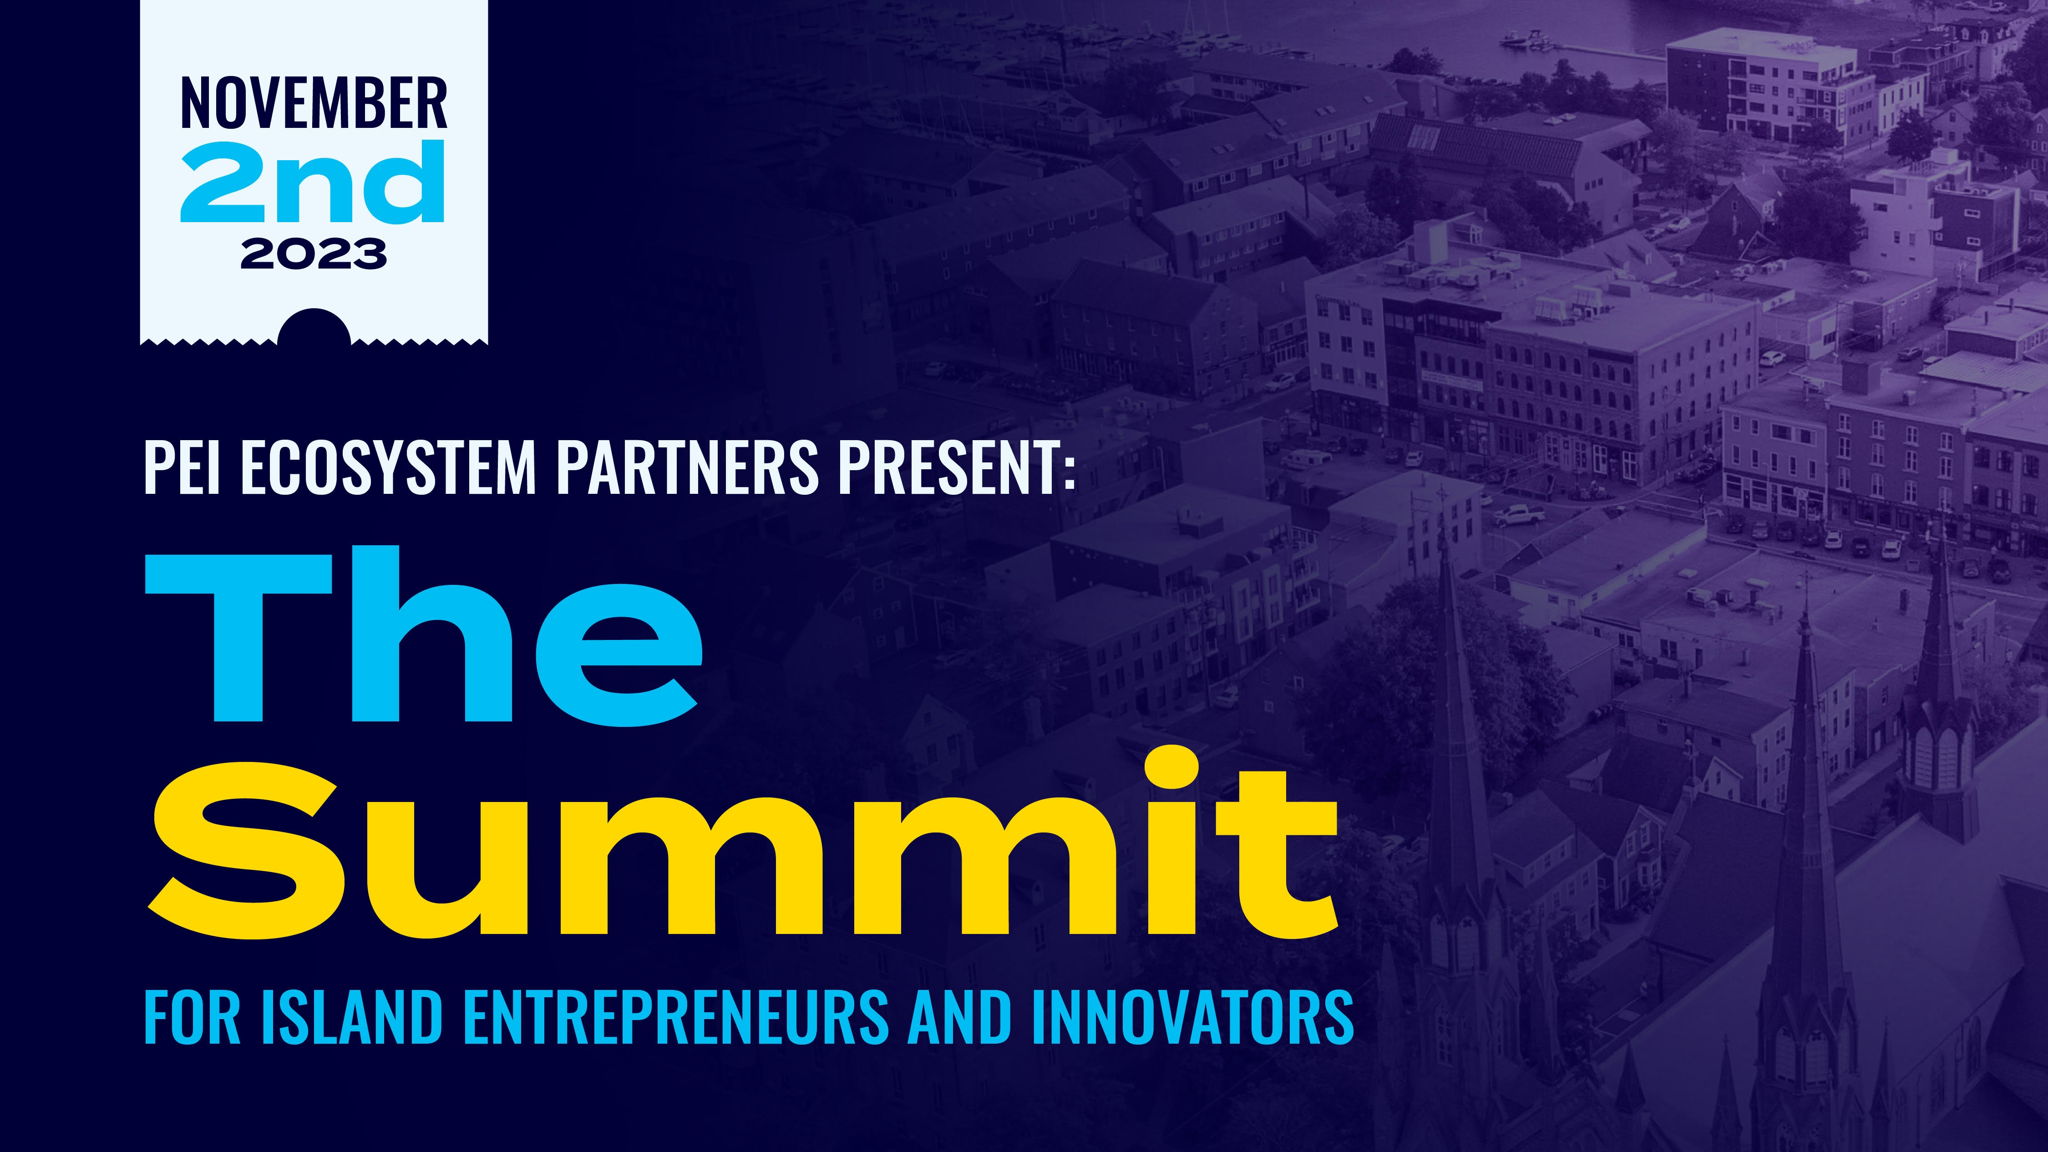 The Summit for Island Entrepreneurs and Innovators